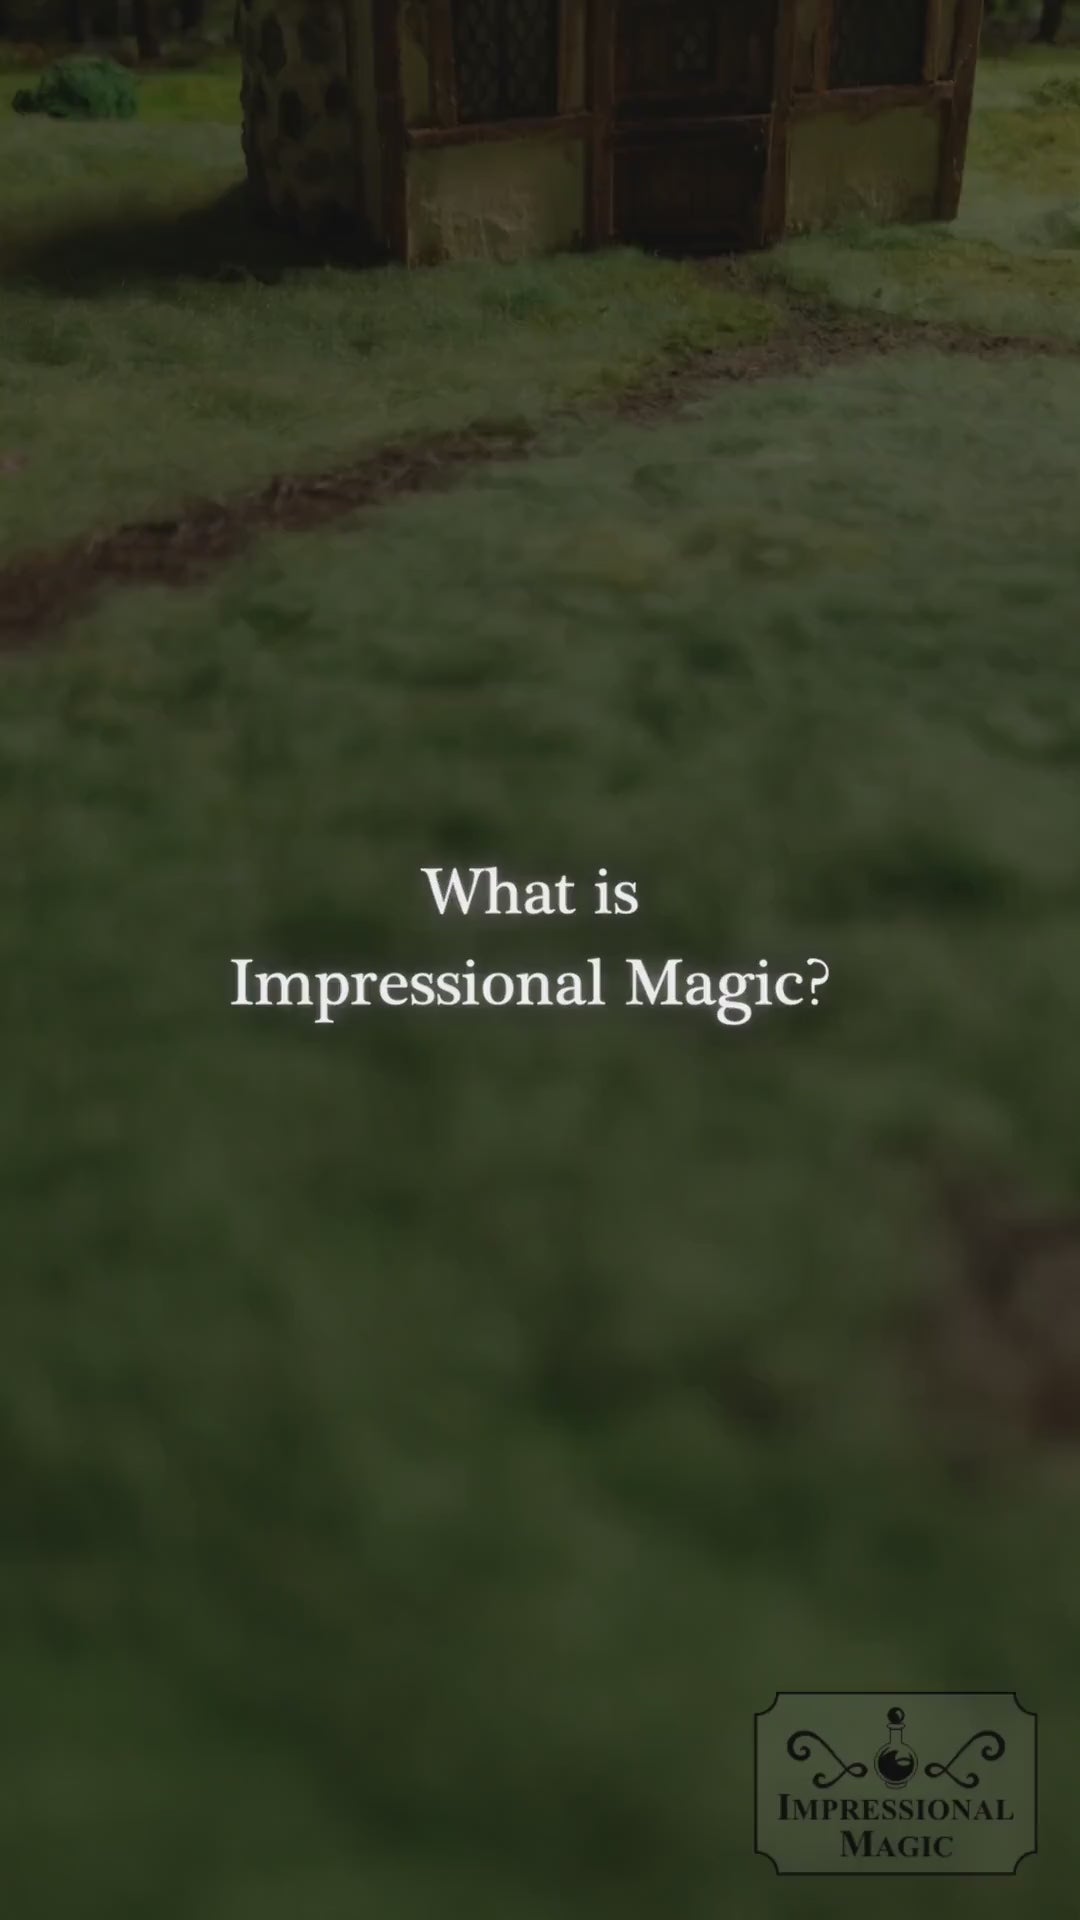 Load video: What is Impressional Magic Video